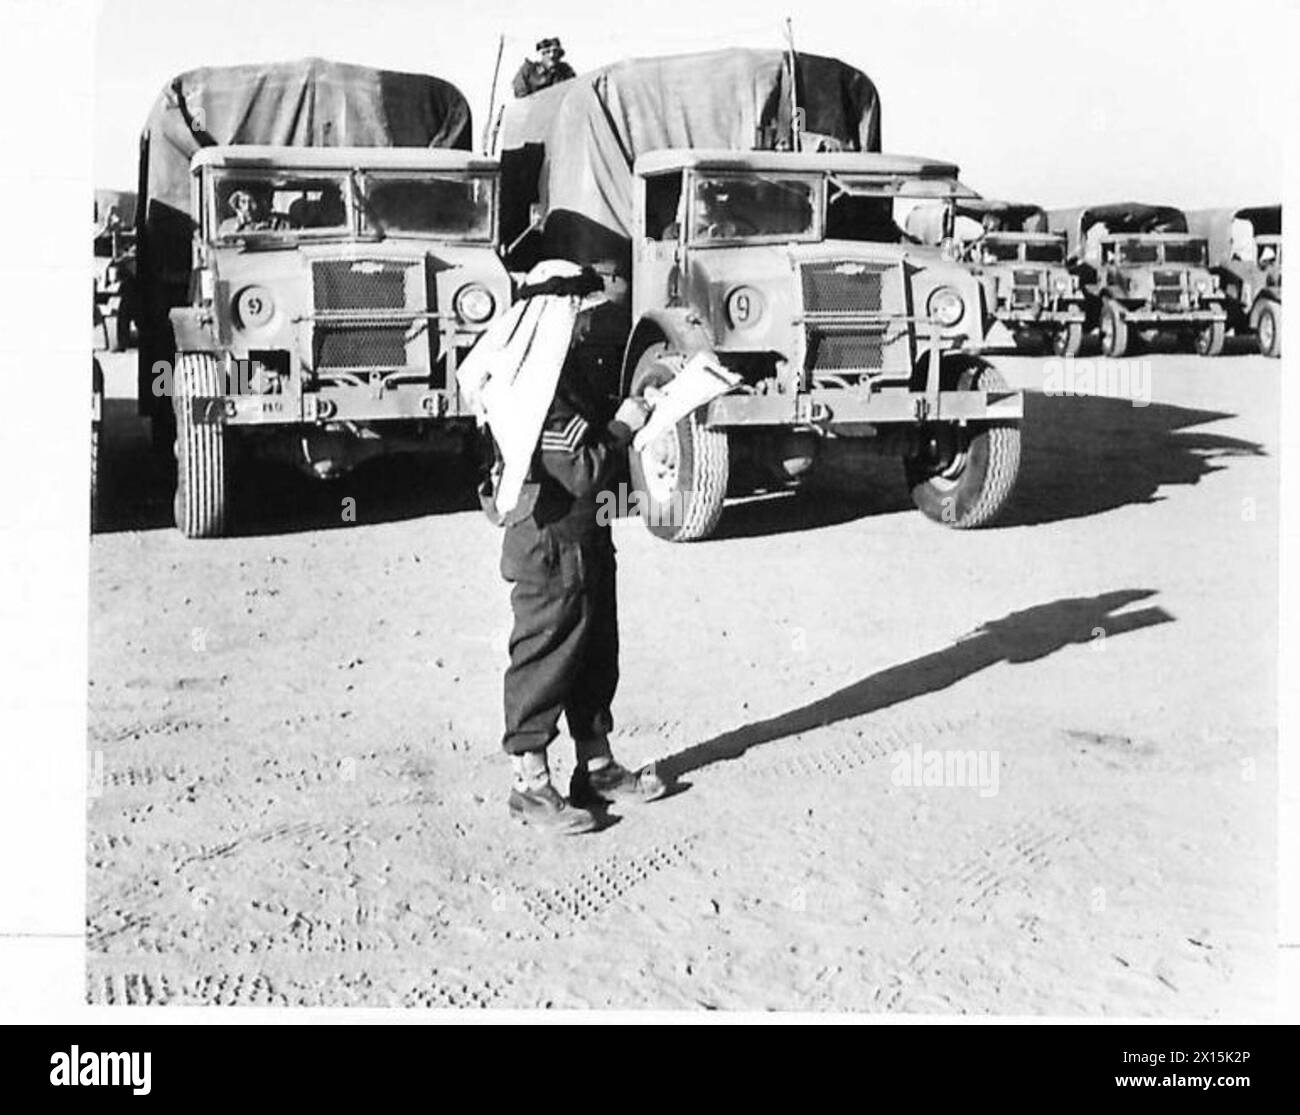 BRITISH EXPEDITIONARY FORCE TO FIGHT LOCUSTS IN THE MIDDLE EAST - The M.T. sergeant checks off the vehicles as they leave United Nations Organisation [UNO] Stock Photo